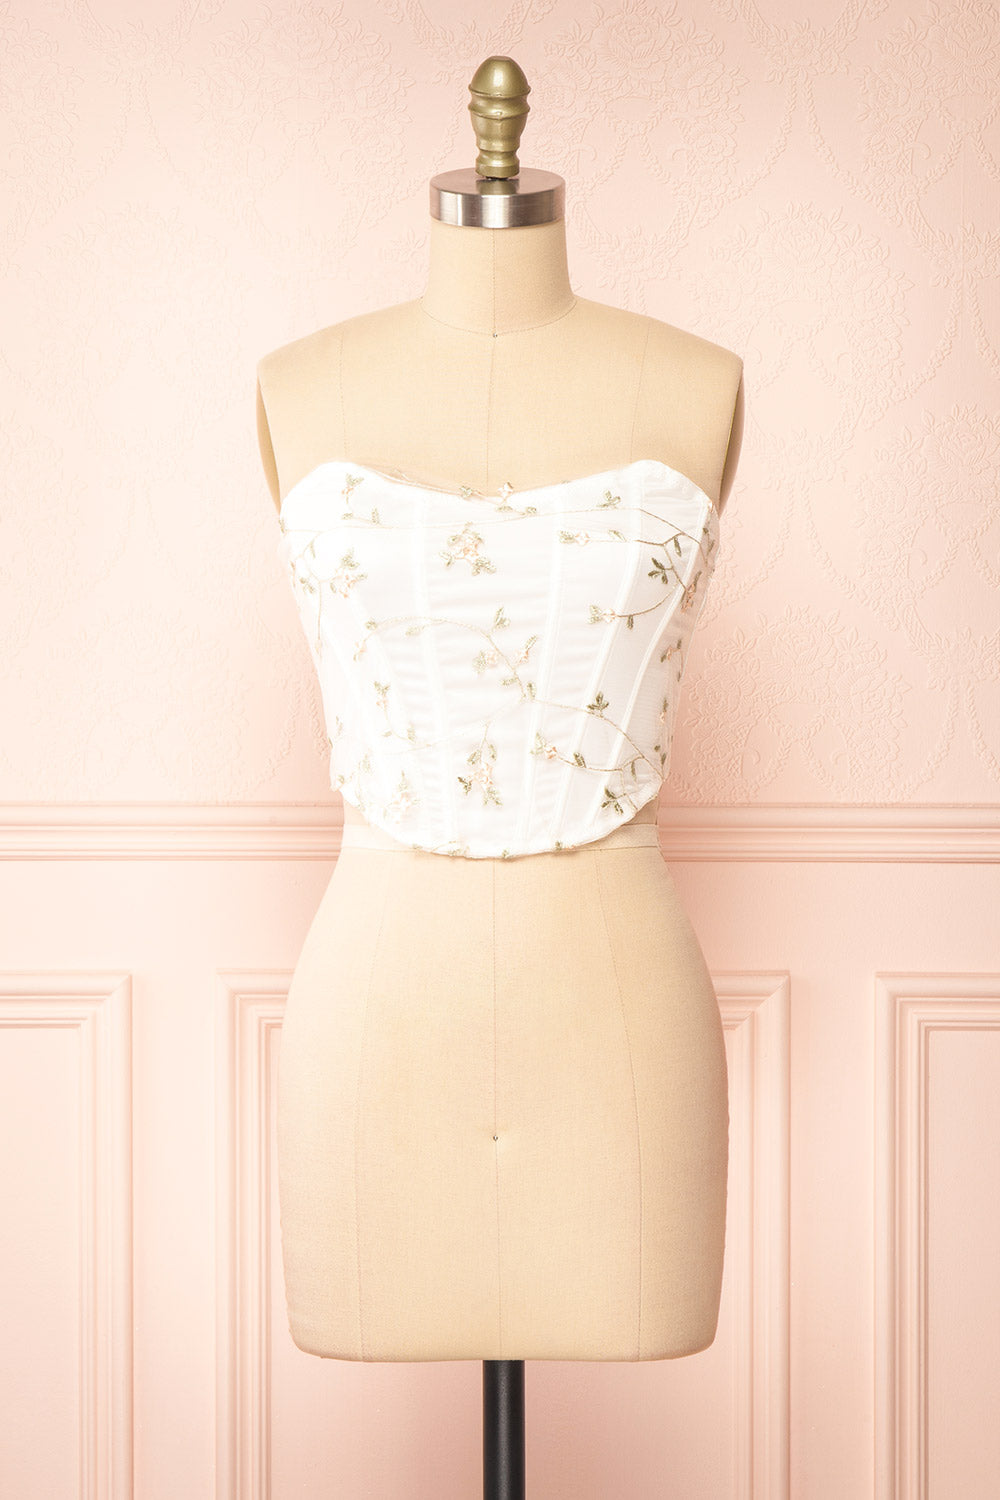 Perline | Corset Crop Top w/ Floral Embroidery